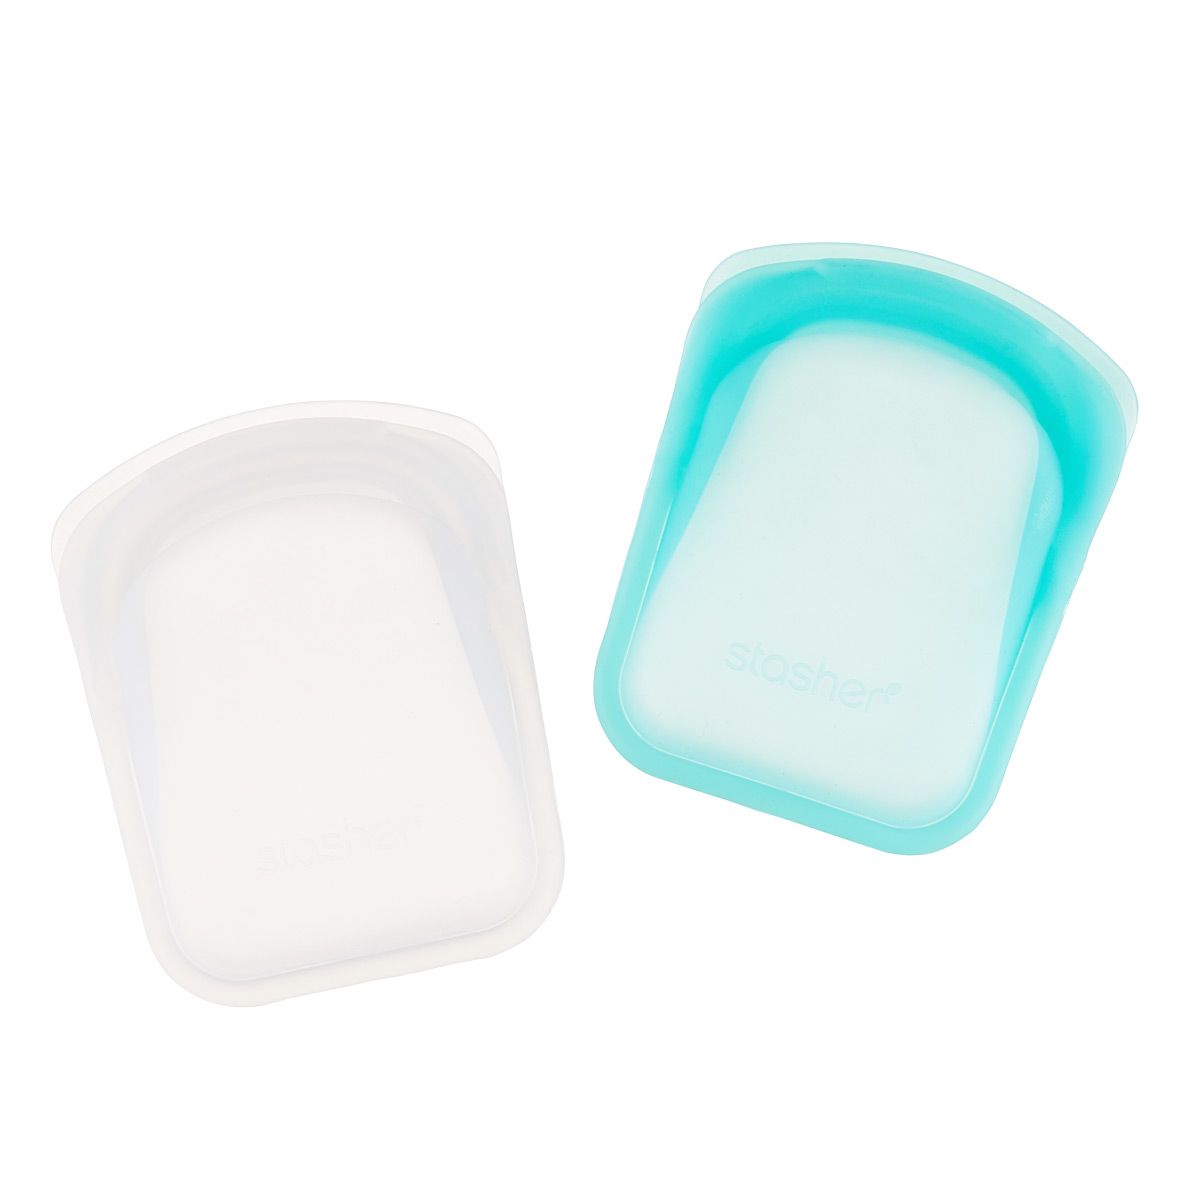 stasher Stasher Silicone Pocket-Size Clear/Aqua Pkg/2 | The Container Store